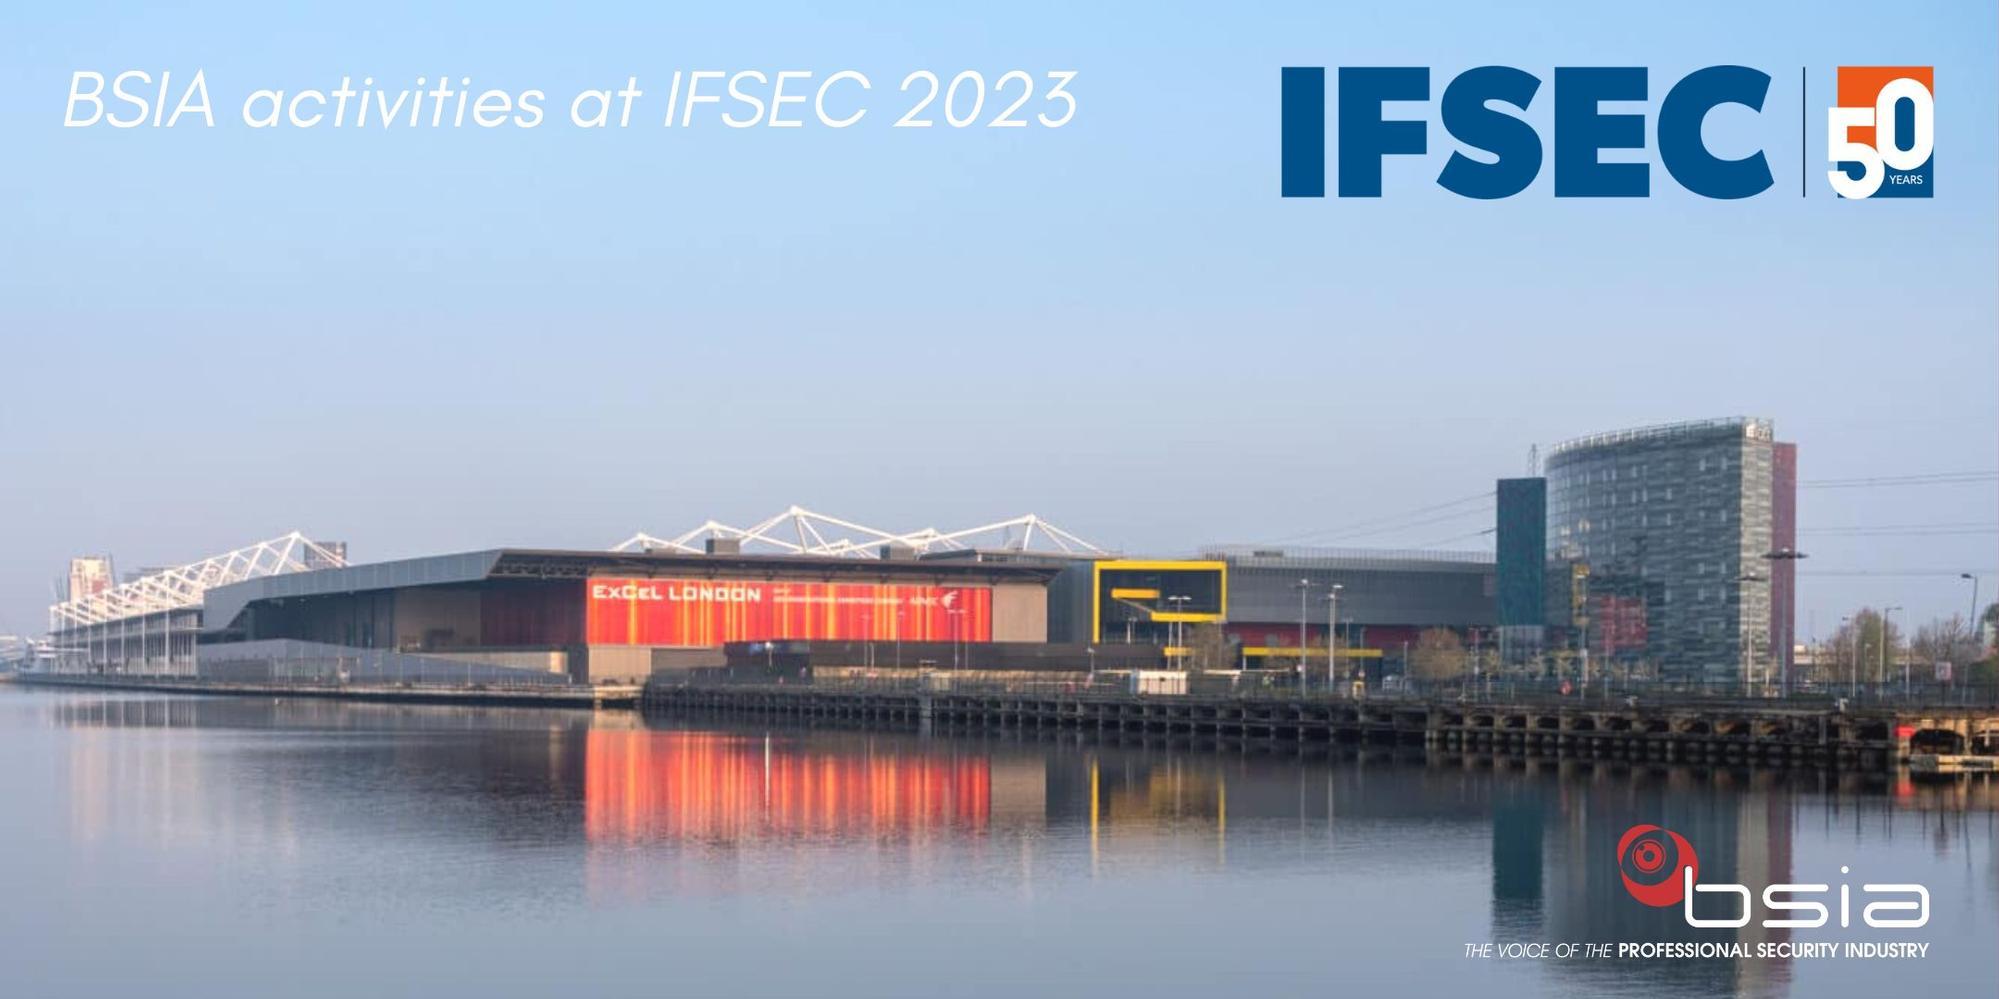 BSIA activities and related events at IFSEC in 2023